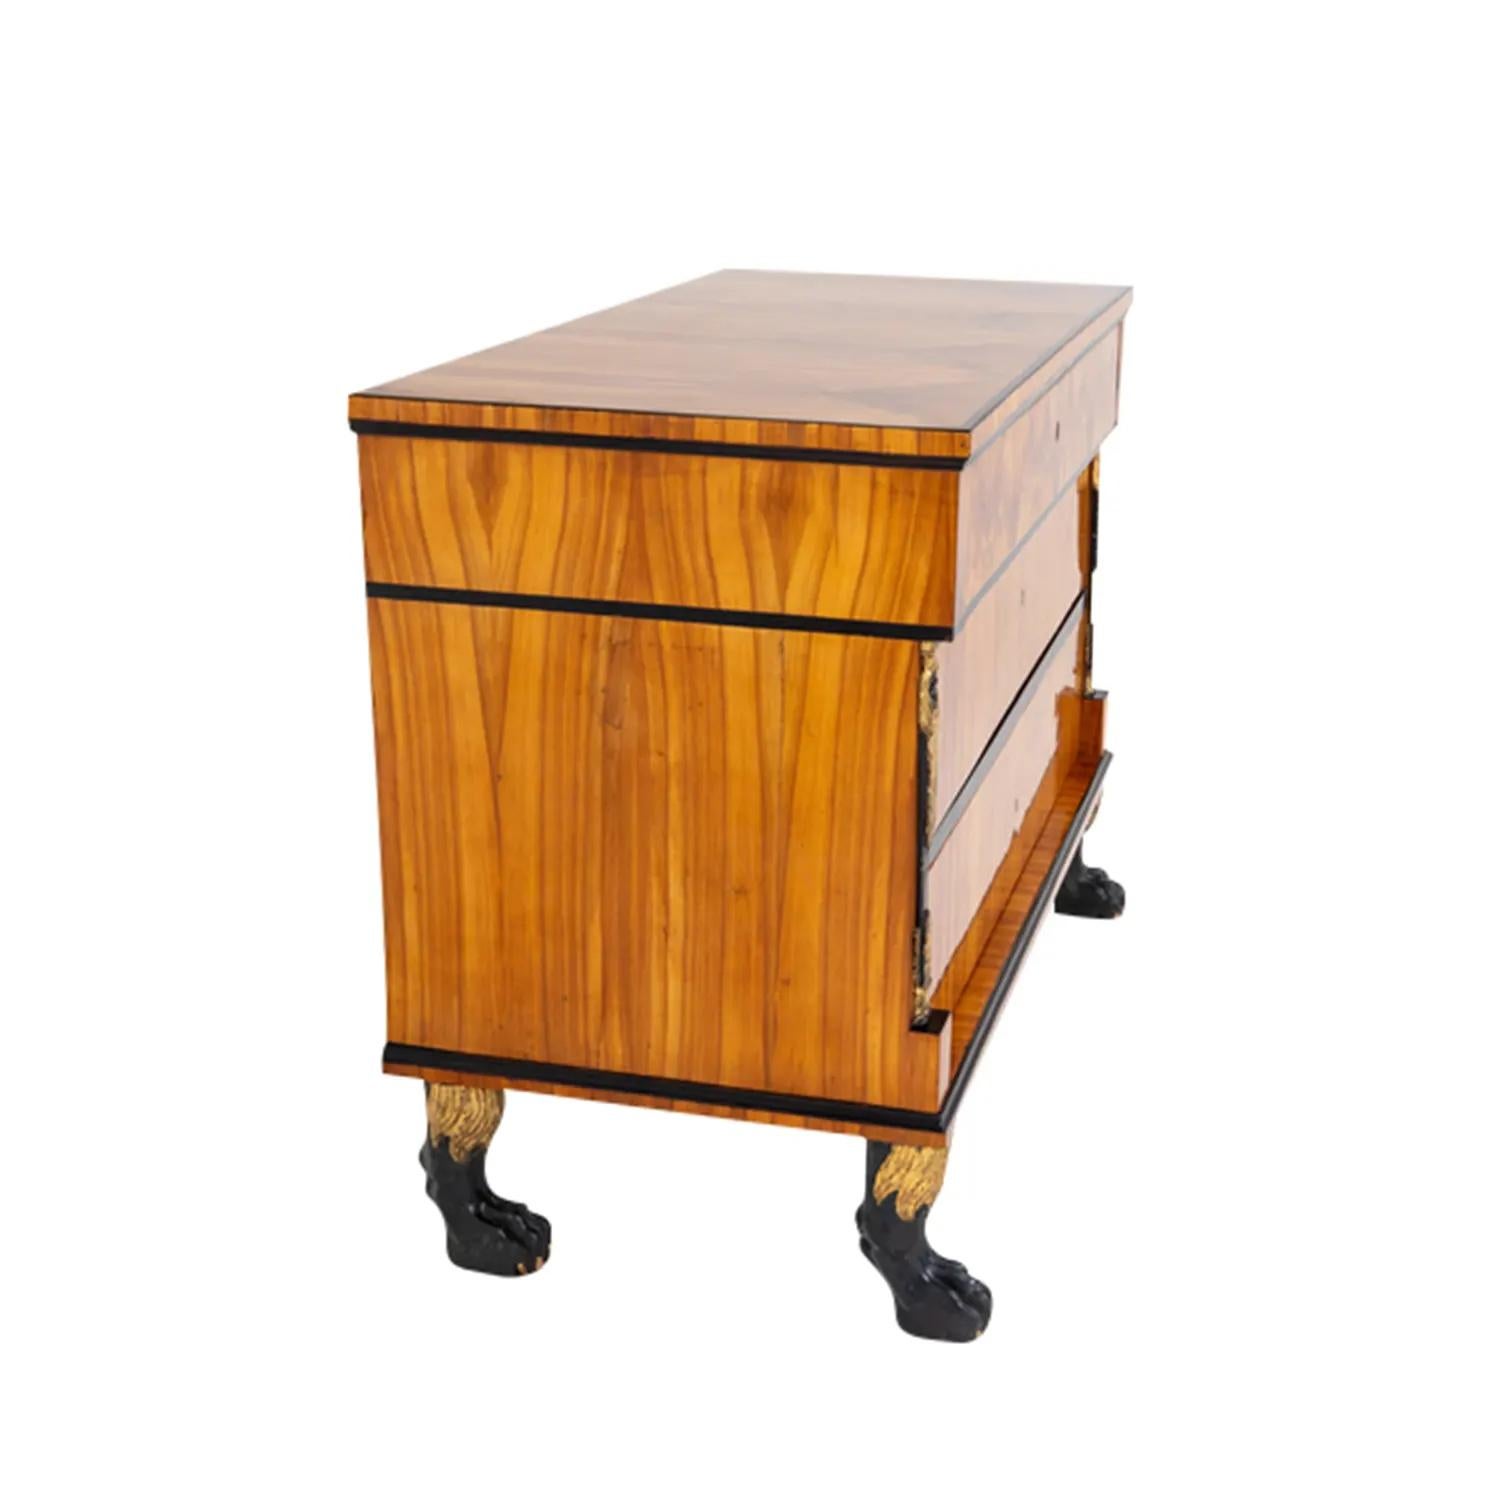 Metal 19th Century German Biedermeier Cherrywood Chest of Drawers - Antique Commode For Sale